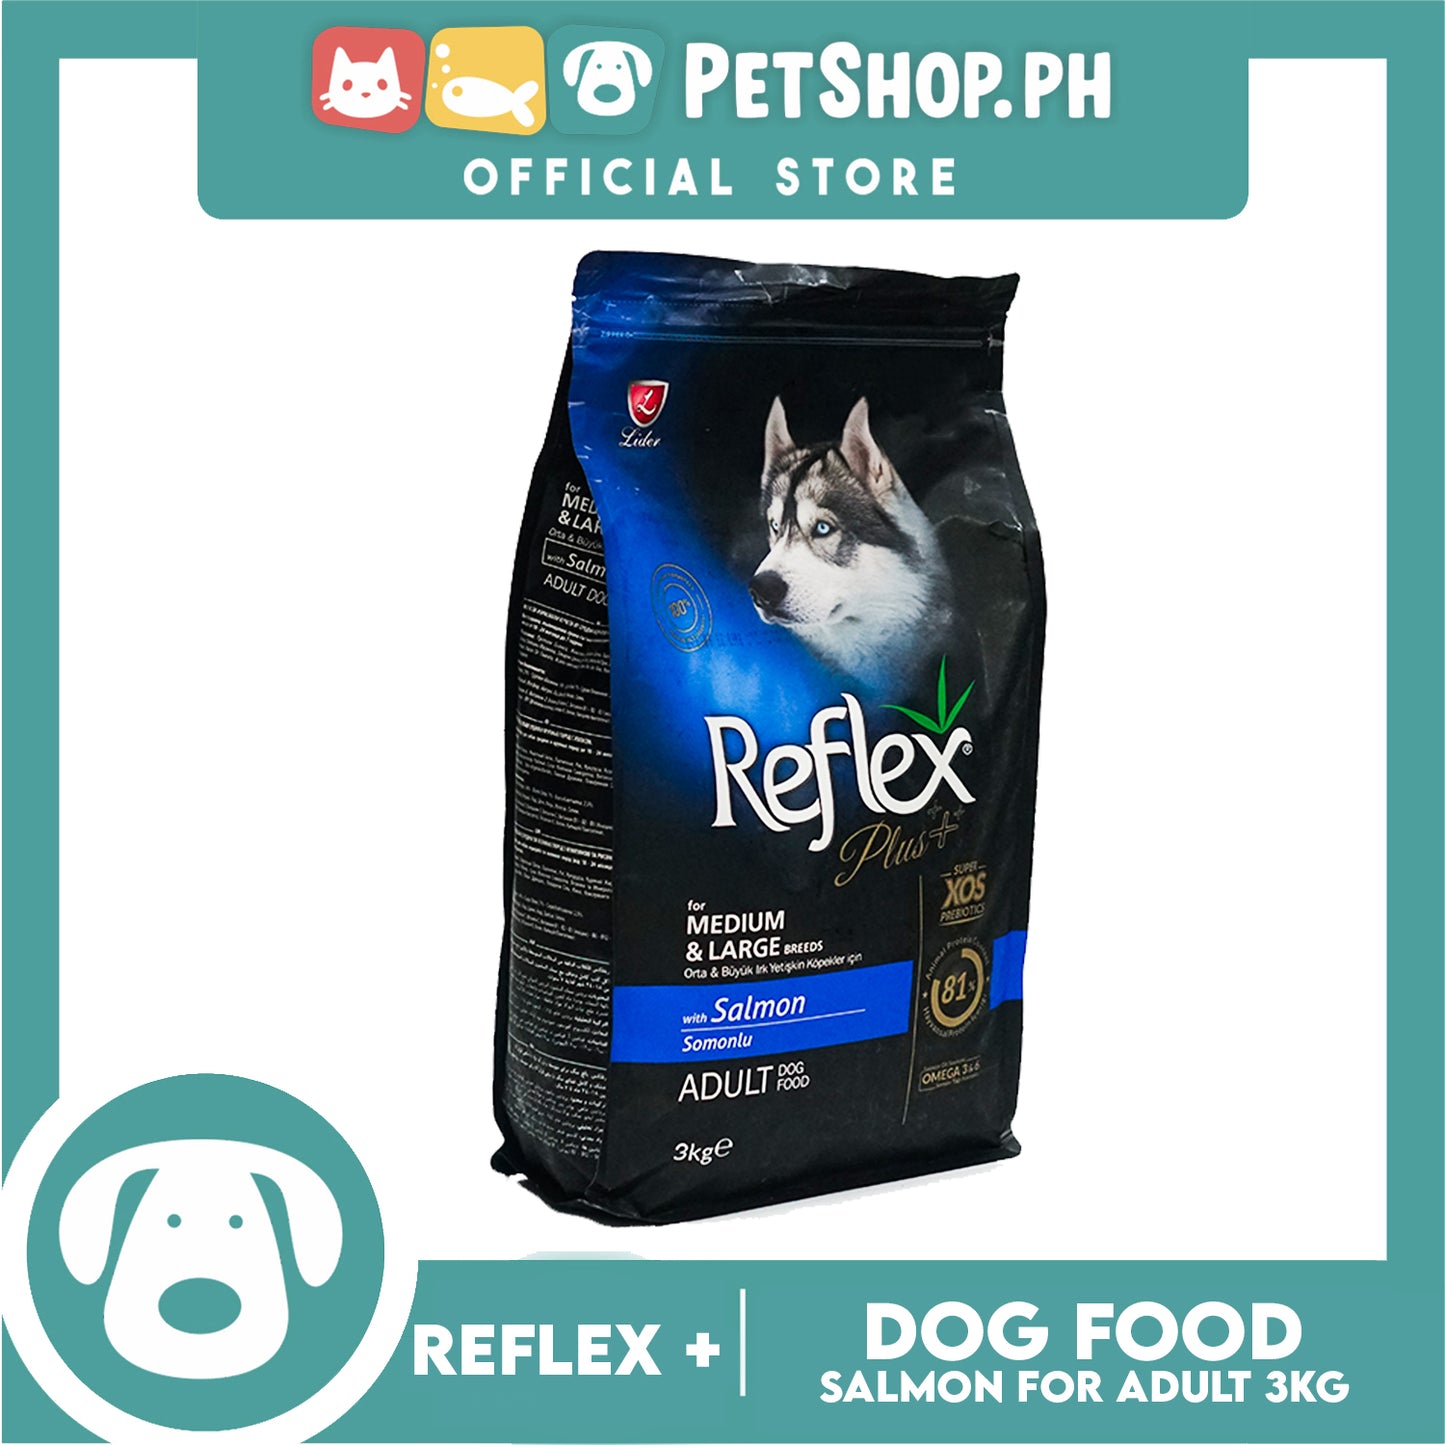 Reflex Plus Adult Dog Food for Medium and Large with Salmon 3kg